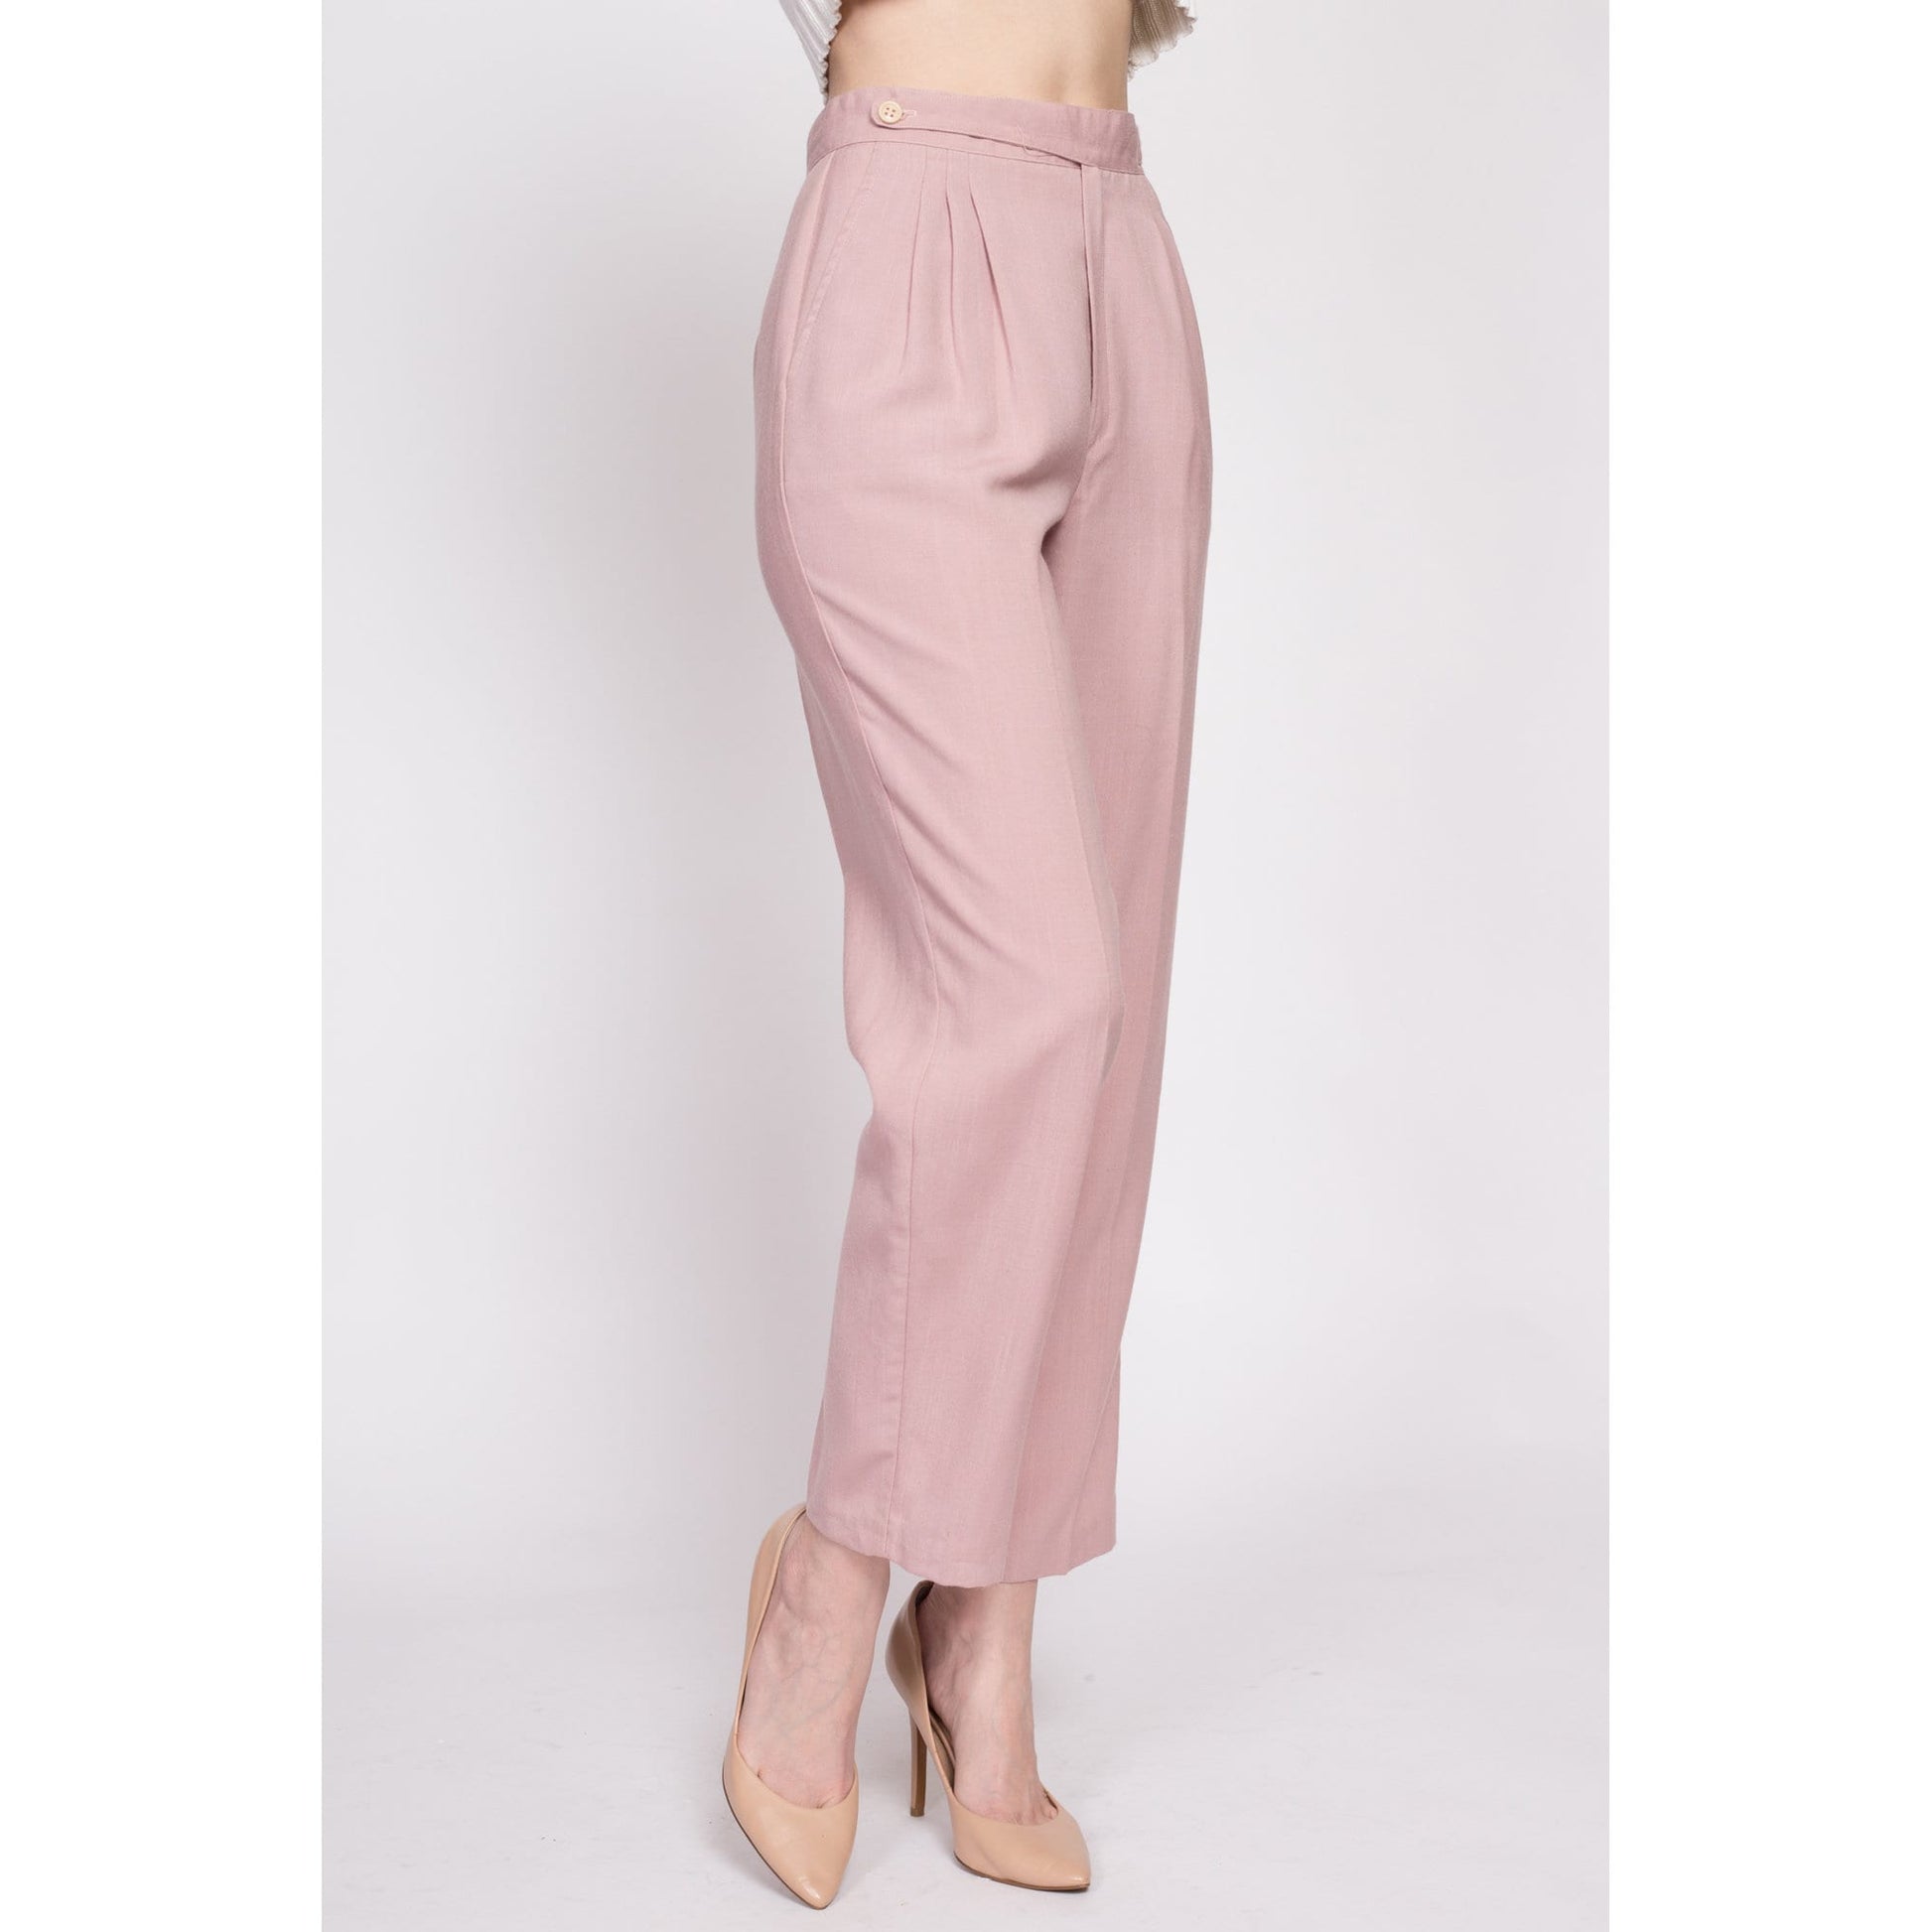 80s Dusty Lilac Purple Trousers - Petite Small, 25.5" | Vintage High Waisted Pleated Tapered Leg Pocket Pants